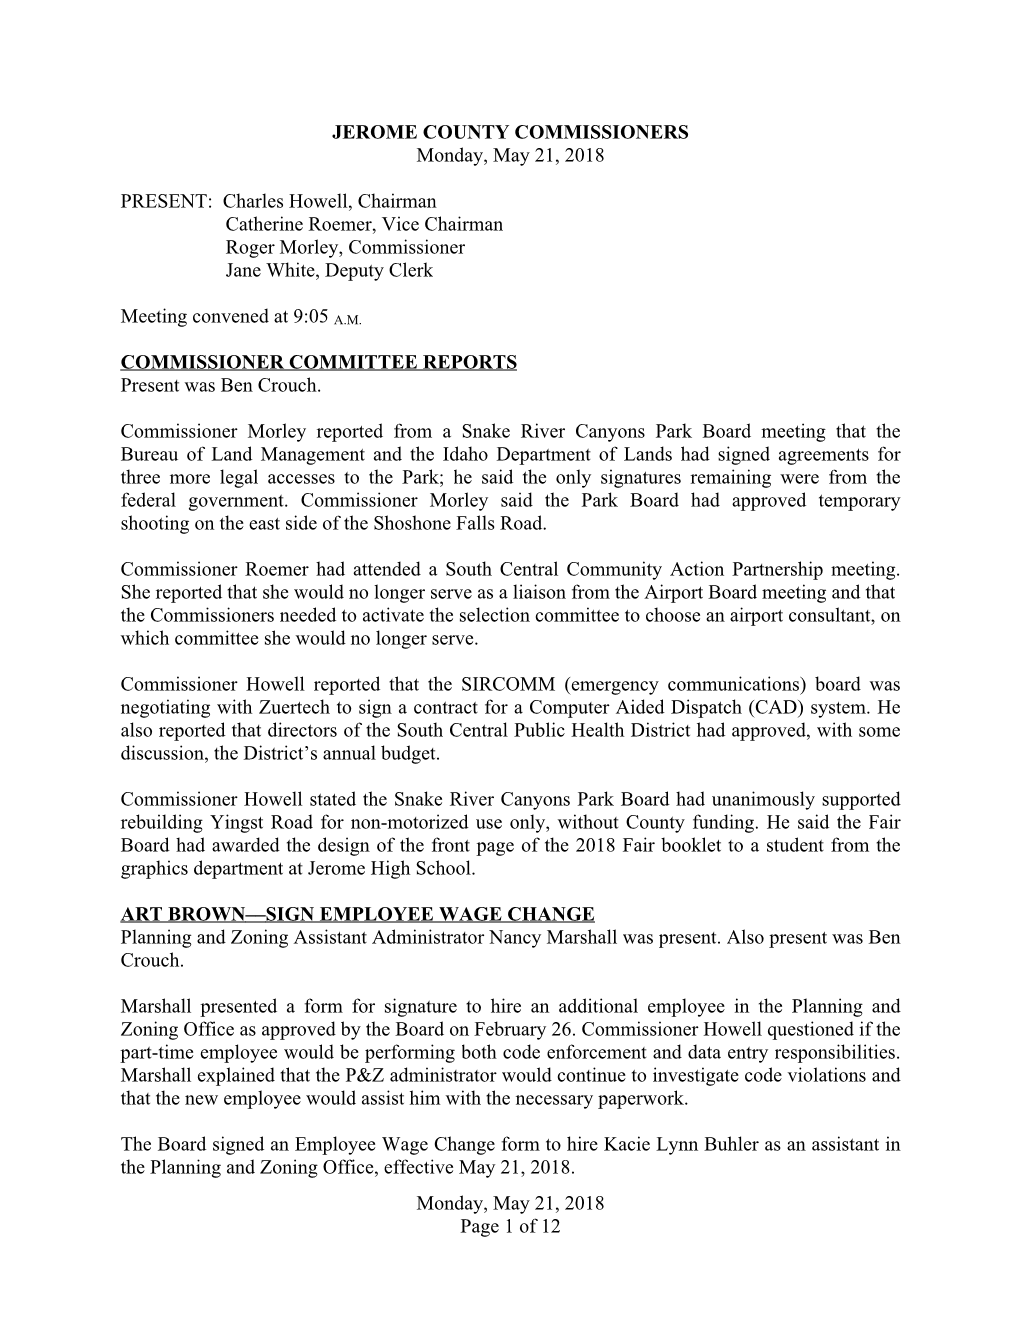 Monday, May 21, 2018 Page 1 of 12 JEROME COUNTY COMMISSIONERS Monday, May 21, 2018 PRESENT: Charles Howell, Chairman Catherine